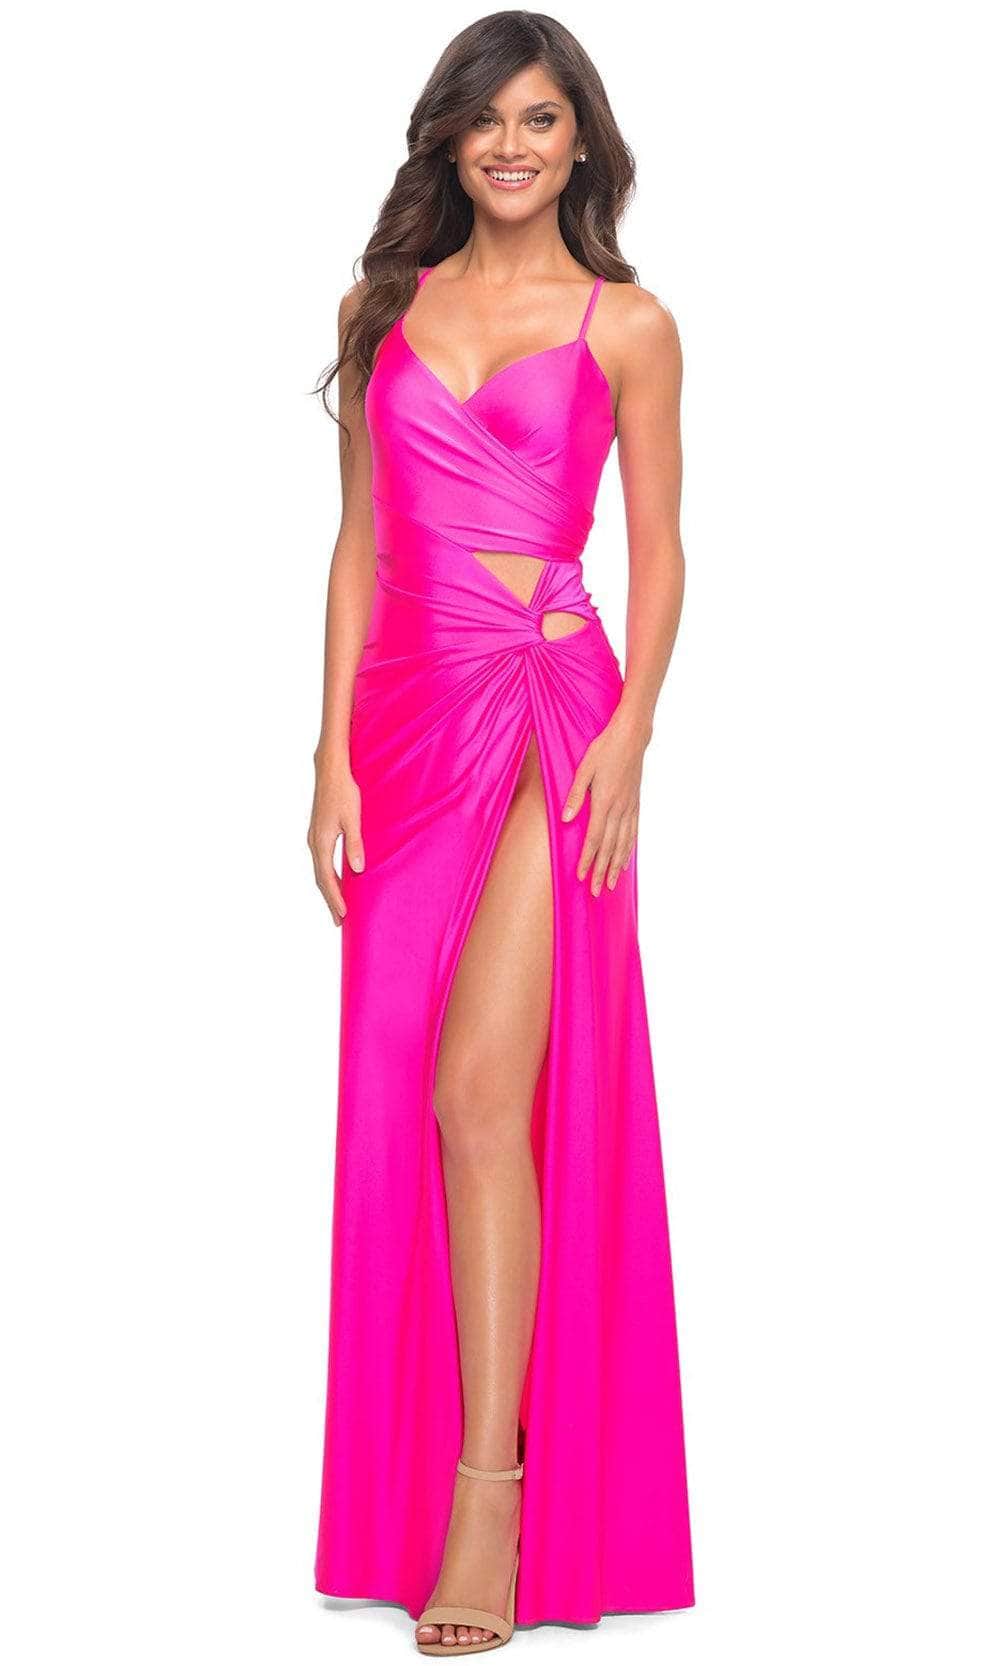 La Femme - 30667SC Sleeveless Ruched V-neck Evening Dress - 1 pc Neon Pink in Size 4 Available CCSALE 4 / Neon Pink